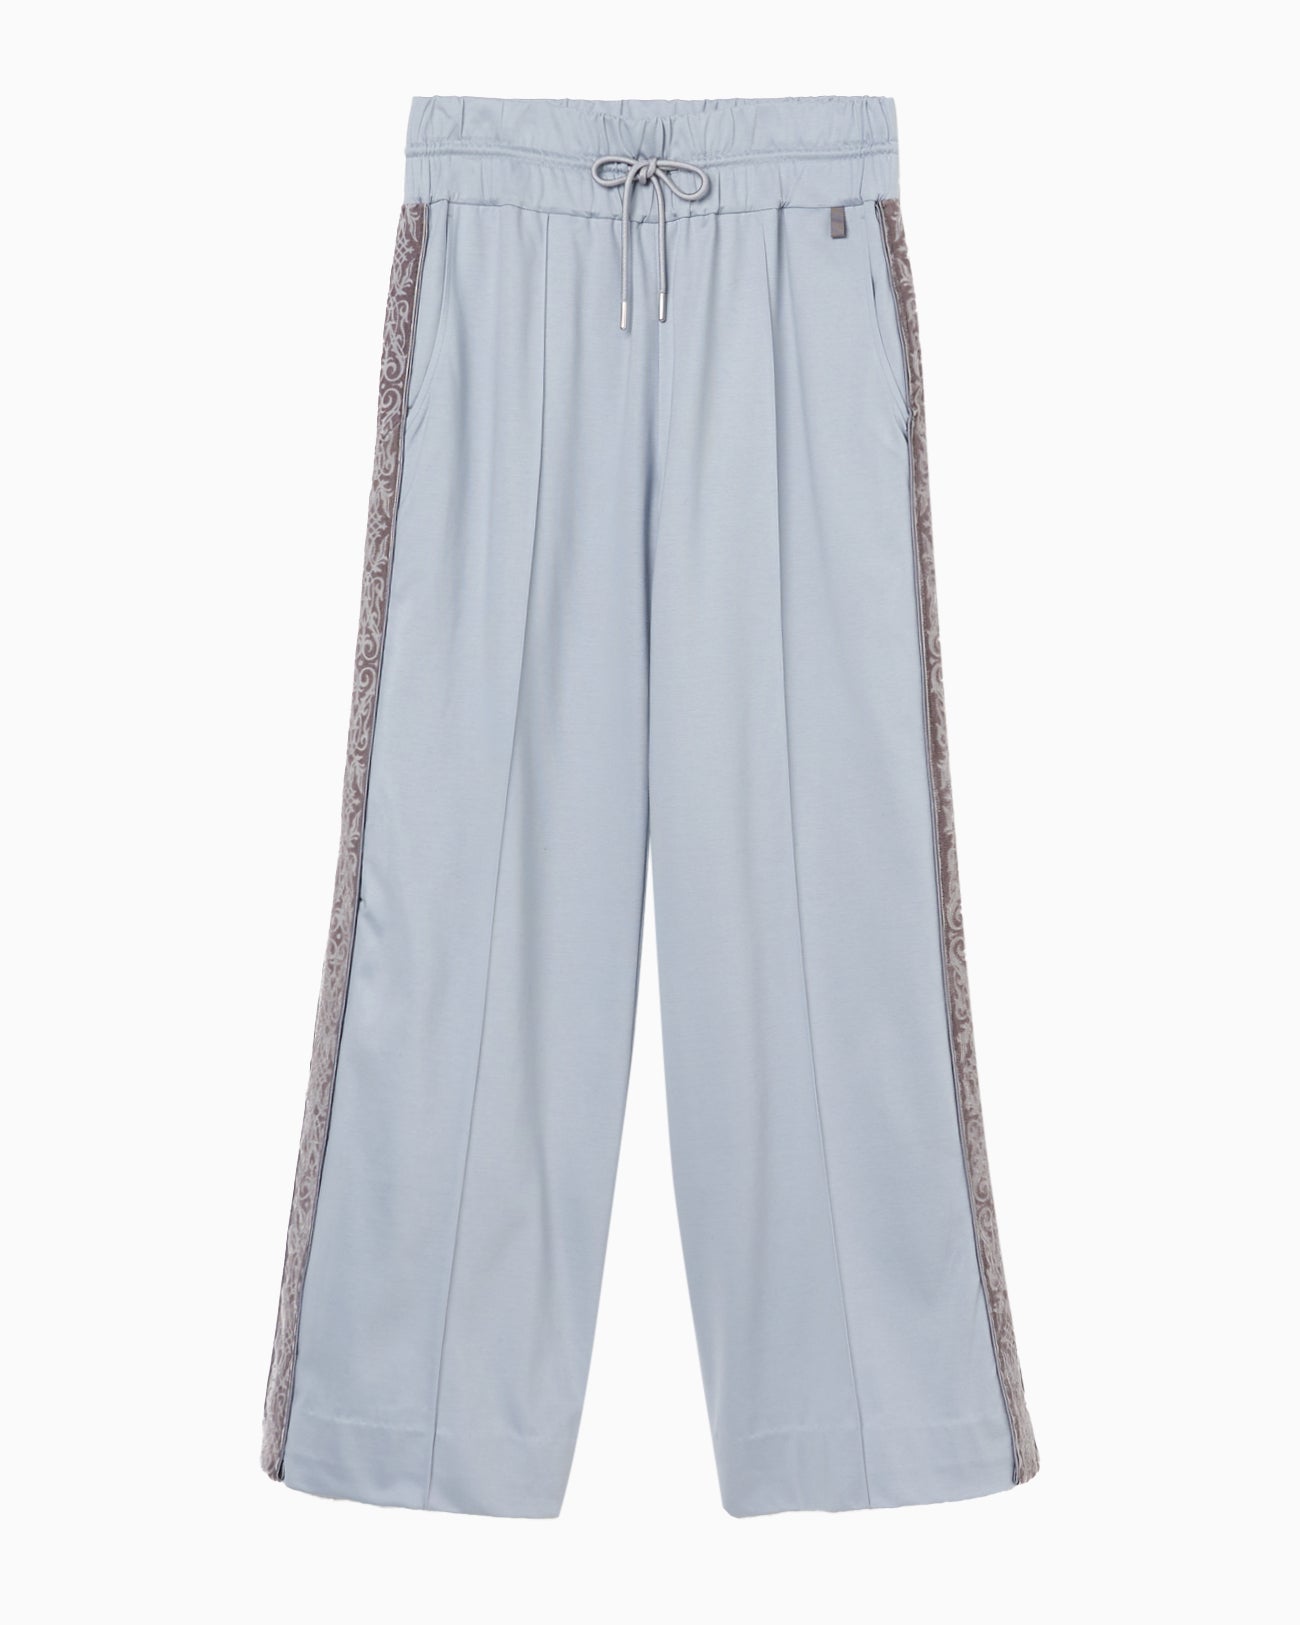 【sakaitakeru collaboration】damask line pale blue pants【Delivery in May 2024】